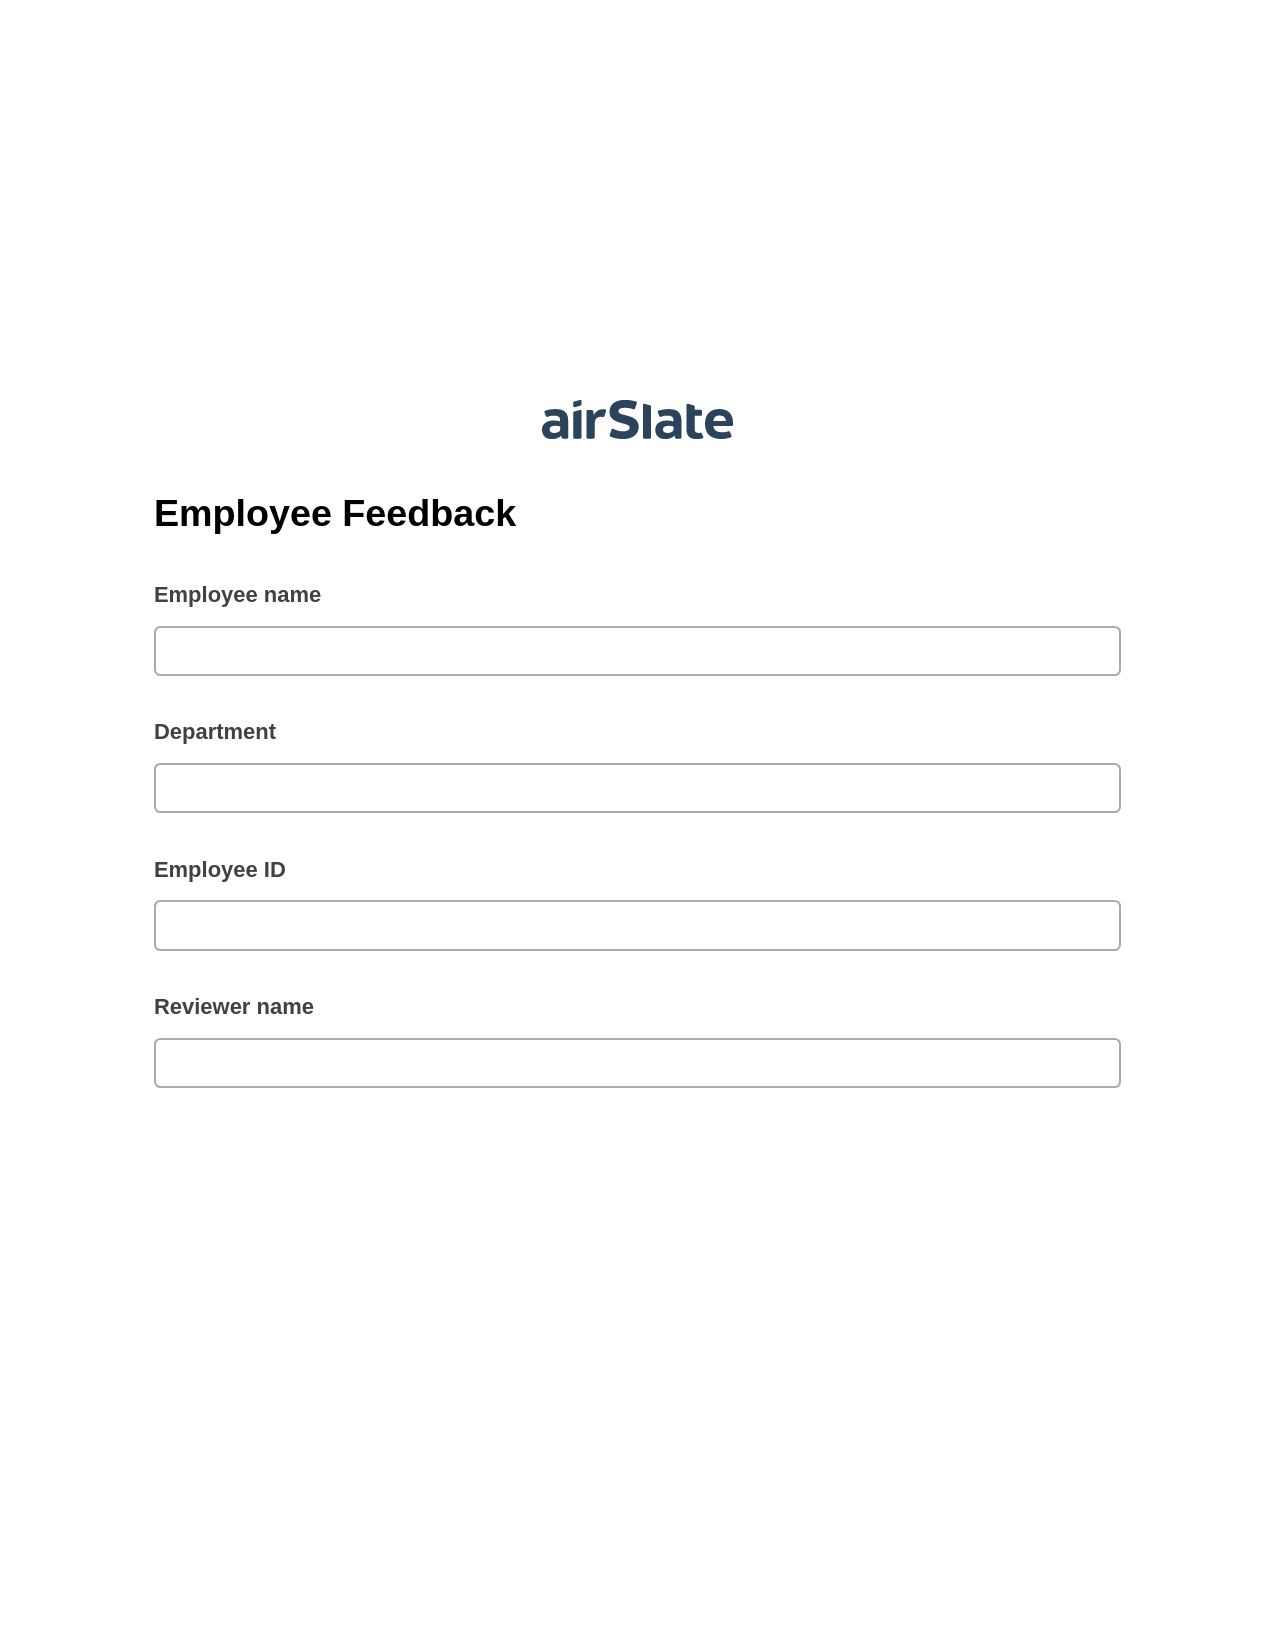 Multirole Employee Feedback Pre-fill Slate from MS Dynamics 365 Records Bot, Create Slate Reminder Bot, Export to Smartsheet